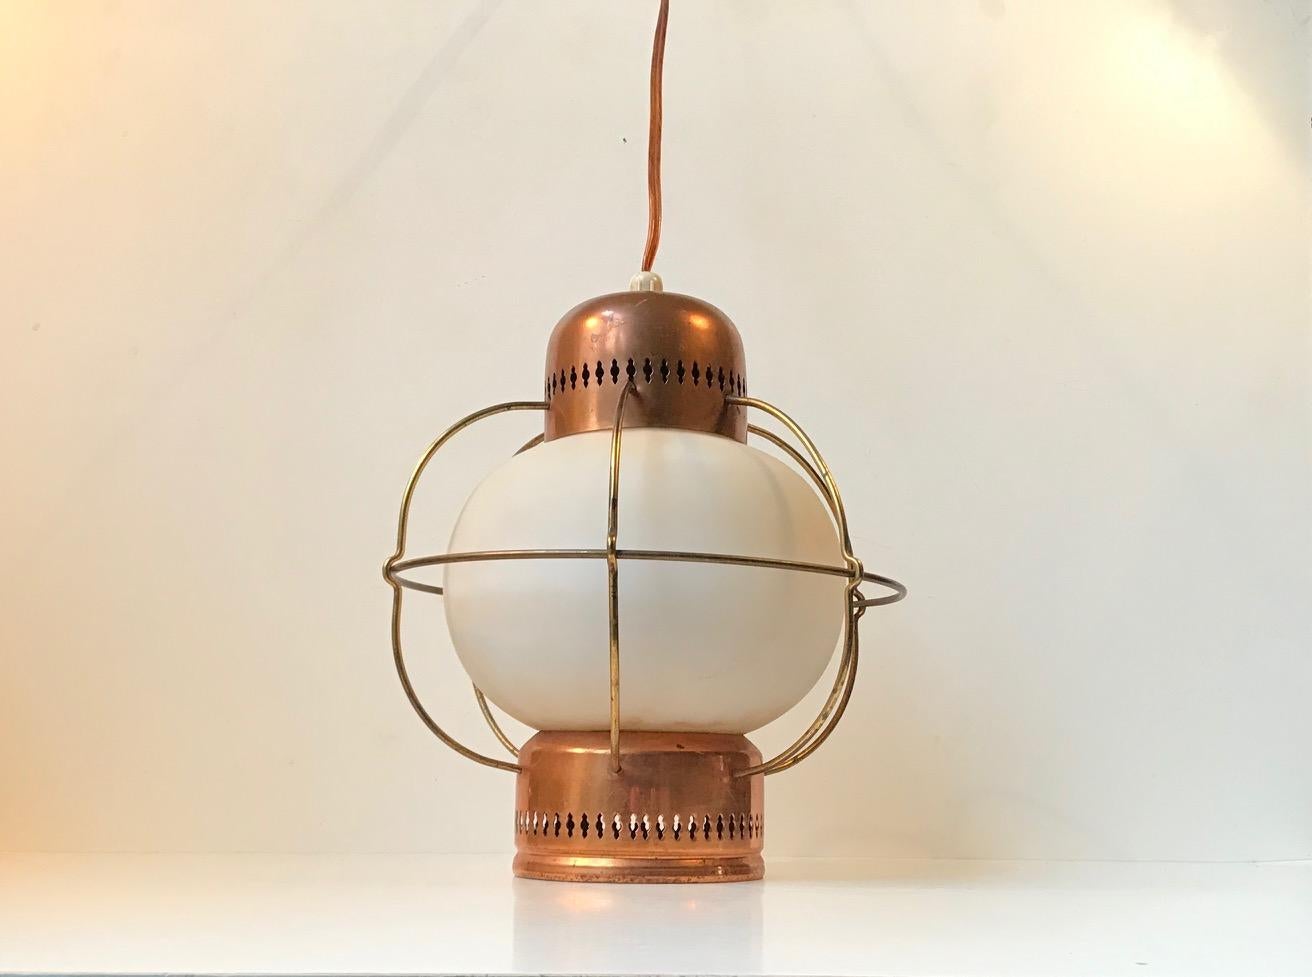 - A midcentury maritime pendant lamp
- Made of copper, brass, opaline glass and caged in brass wire
- It was manufactured by Lyfa in Denmark during the 1960s
- The design may have been executed by Bent Karlby. But this remains uncatalogued.